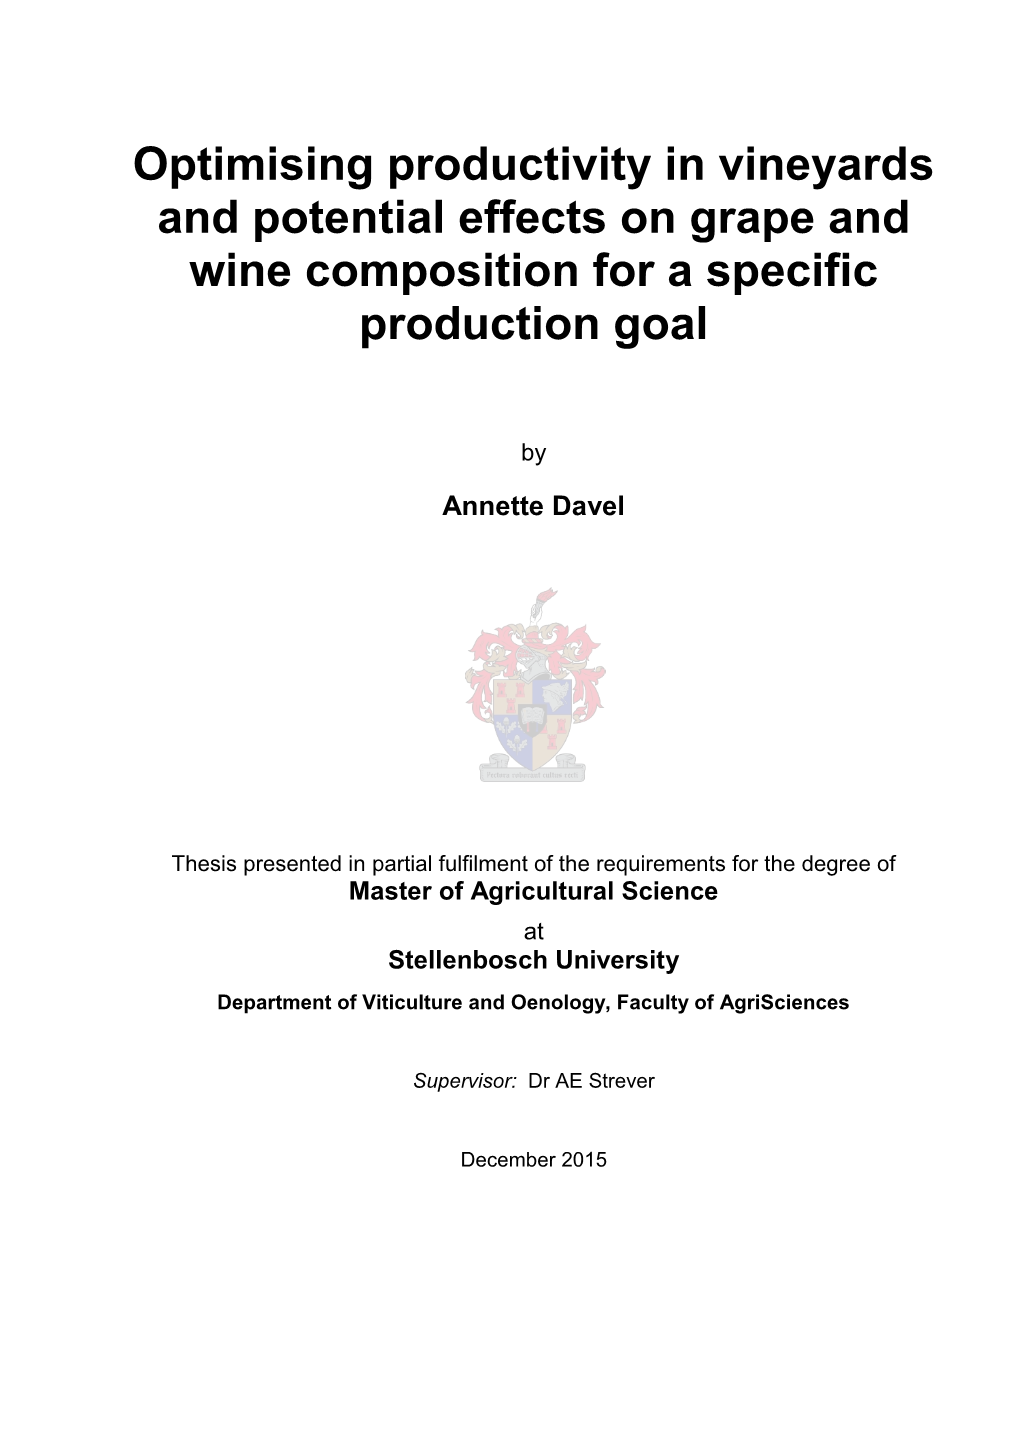 Optimising Productivity in Vineyards and Potential Effects on Grape and Wine Composition for a Specific Production Goal